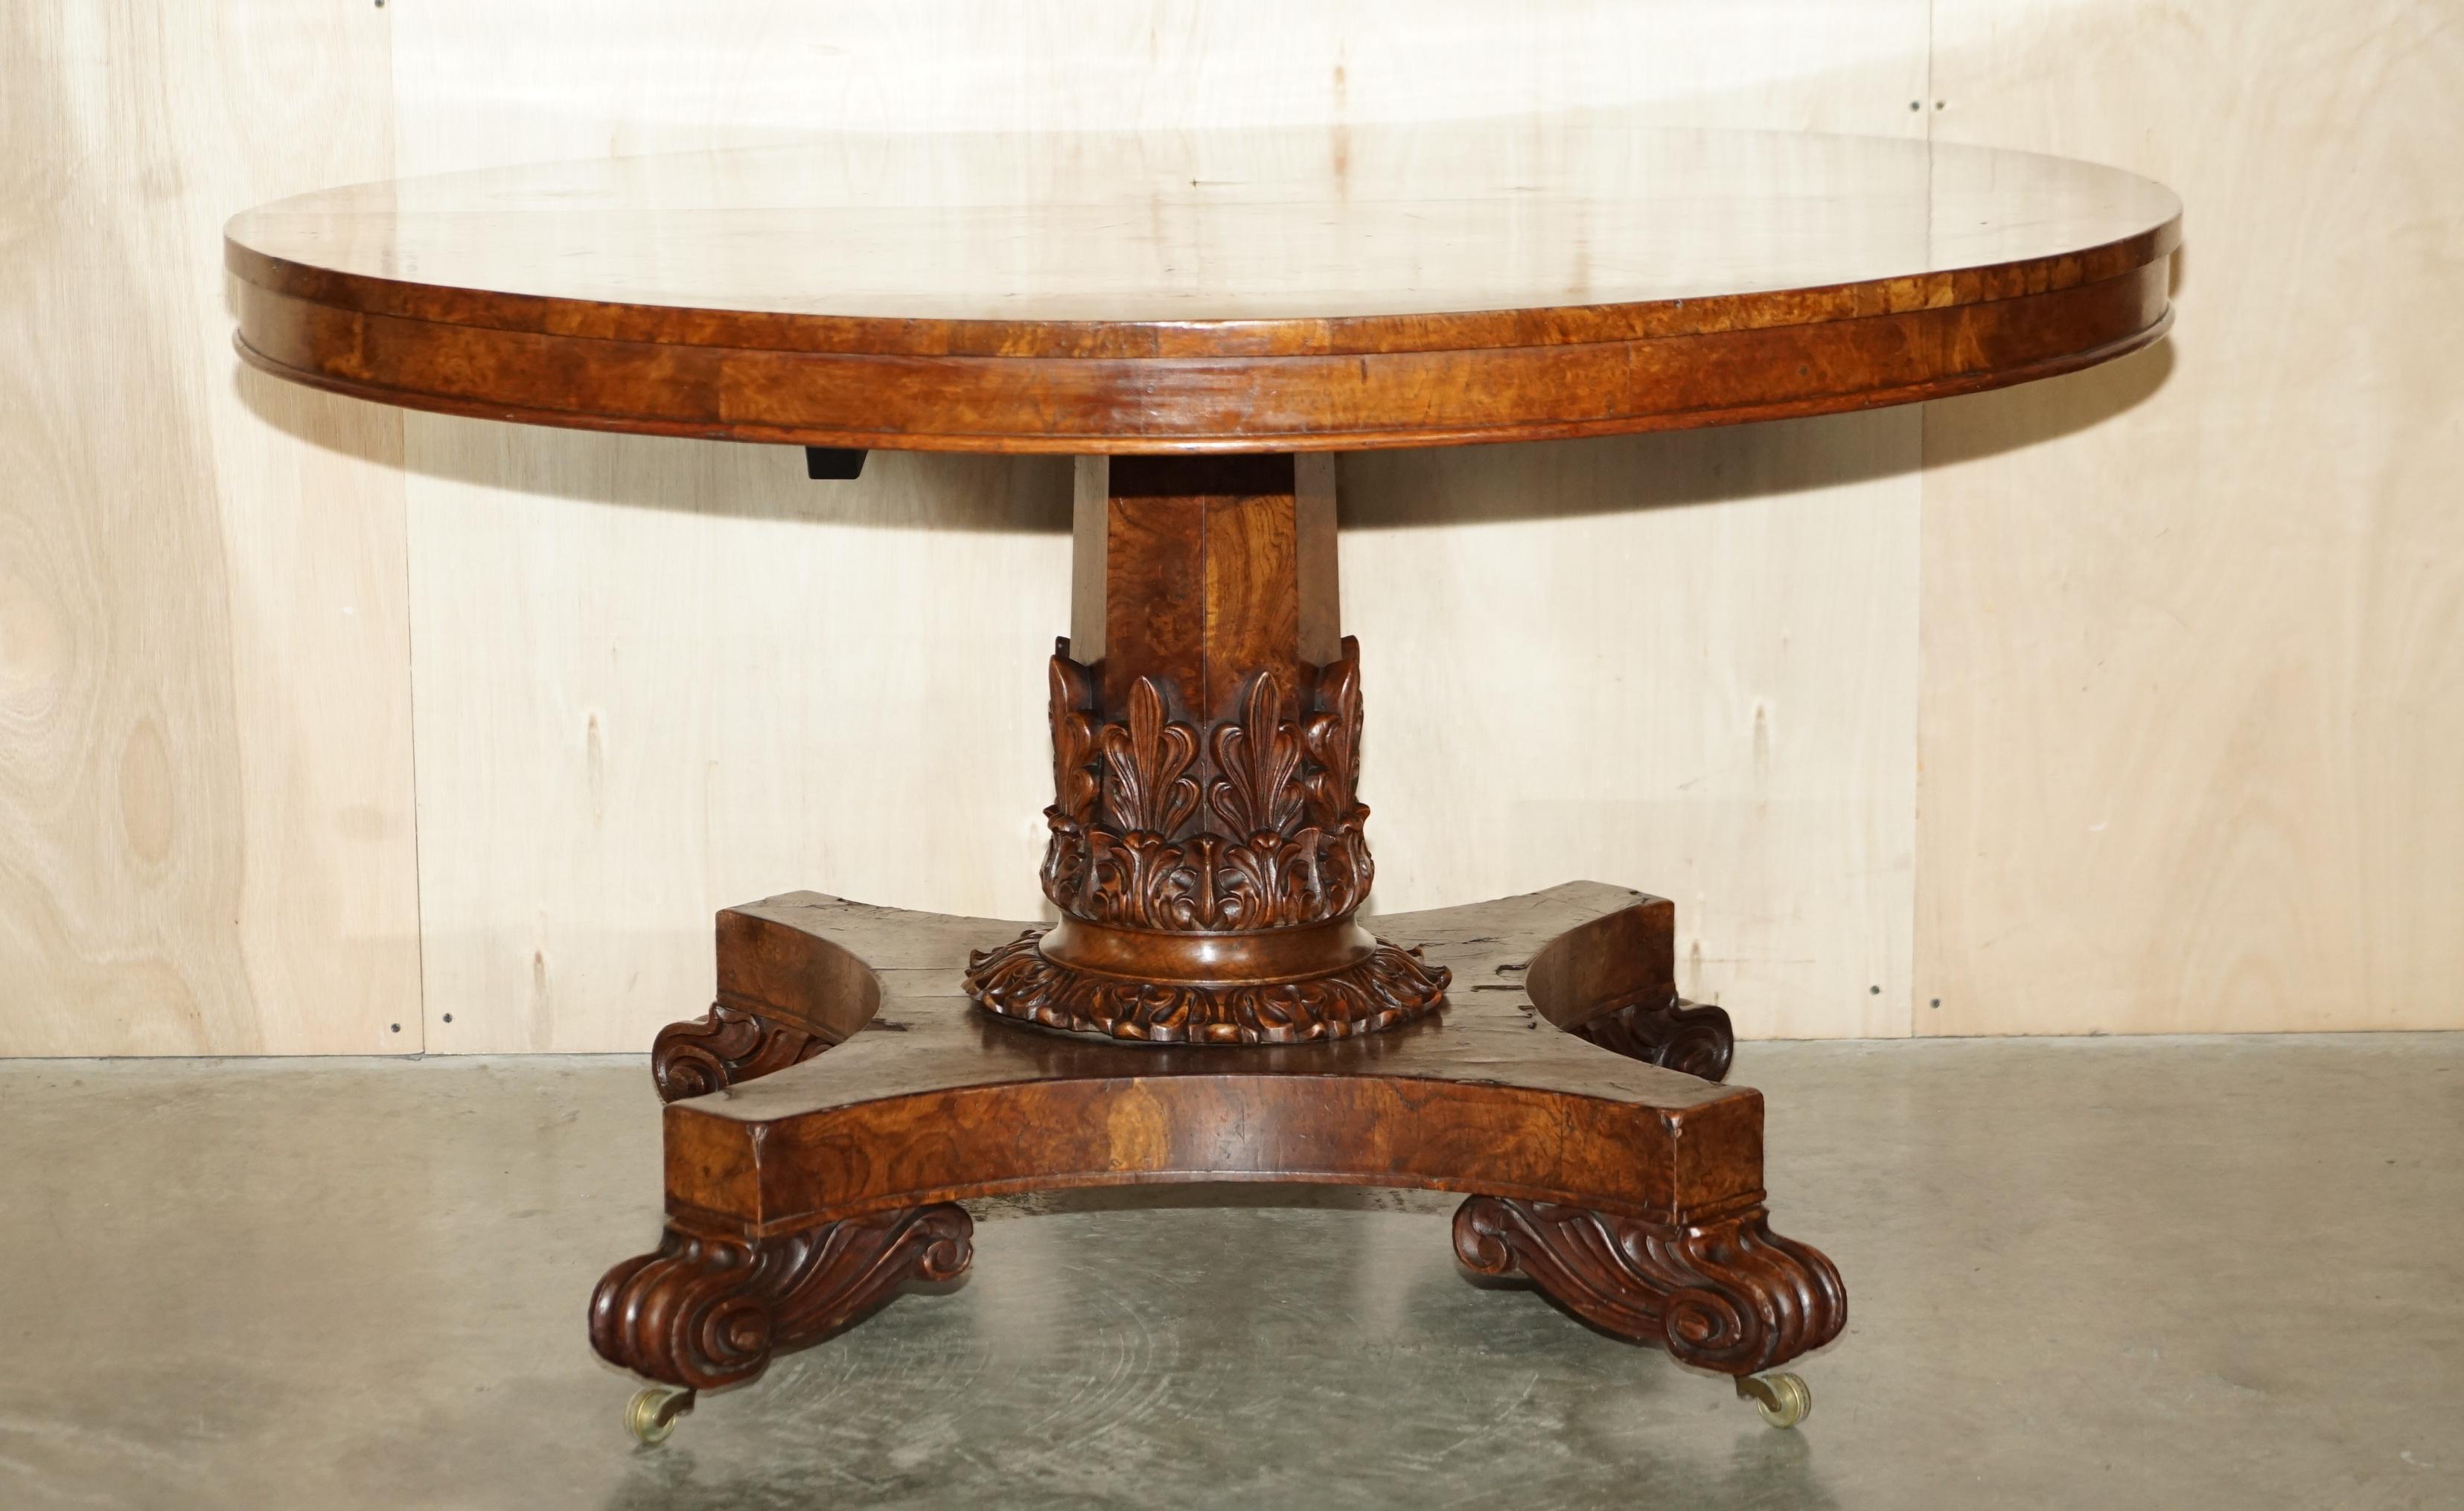 We are delighted to offer for sale this absolutely stunning, early Victorian circa 1840 Pollard, Burl Oak tilt top occasional table

A very good looking well made and decorative piece, hand carved in solid oak, the panels are Pollard oak which is